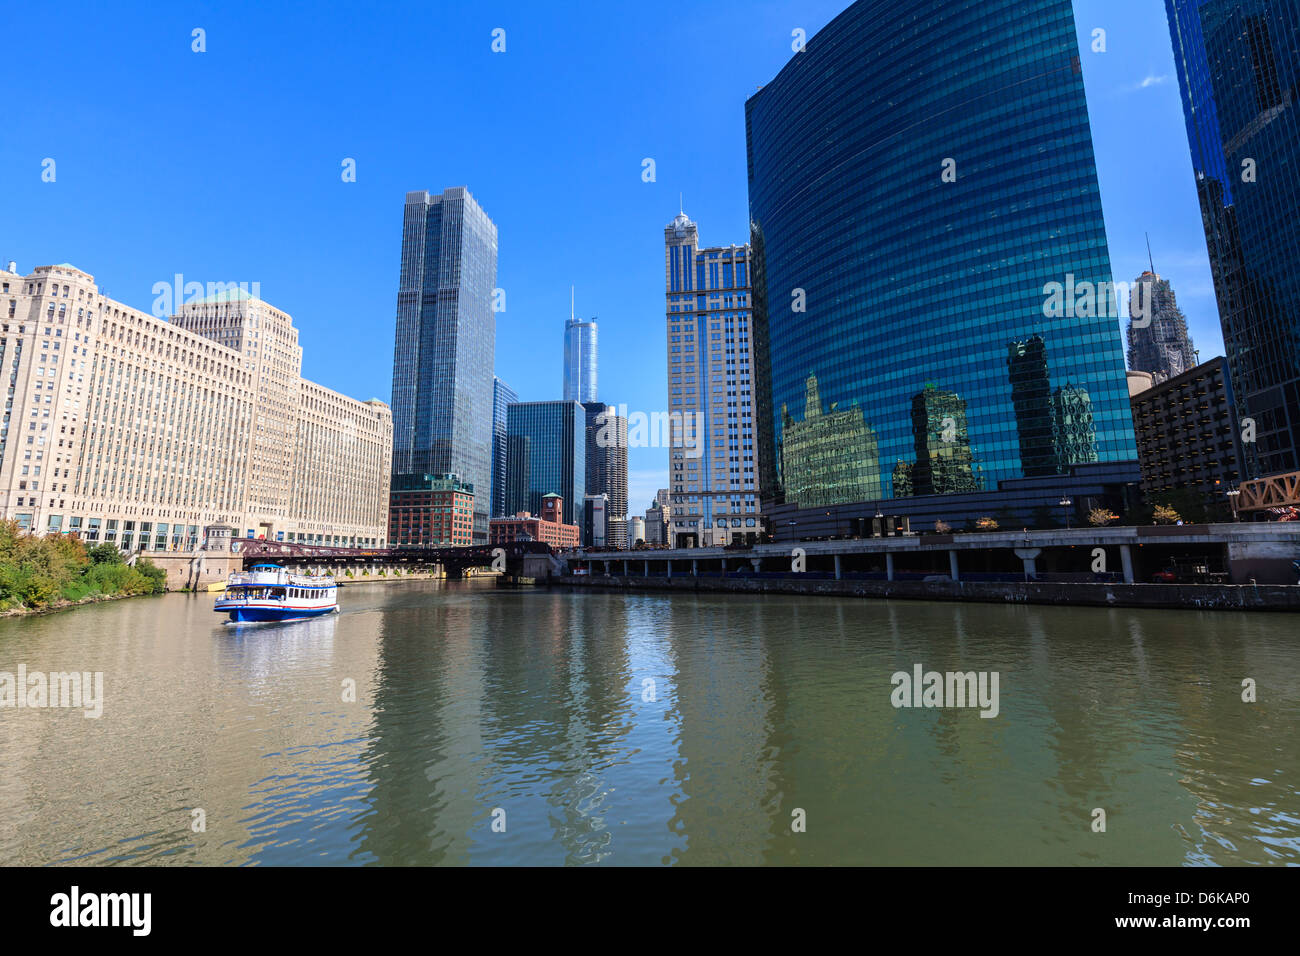 Chicago River, The Merchandise Mart on the left and 333 Wacker Drive building on the right, Chicago, Illinois, USA Stock Photo